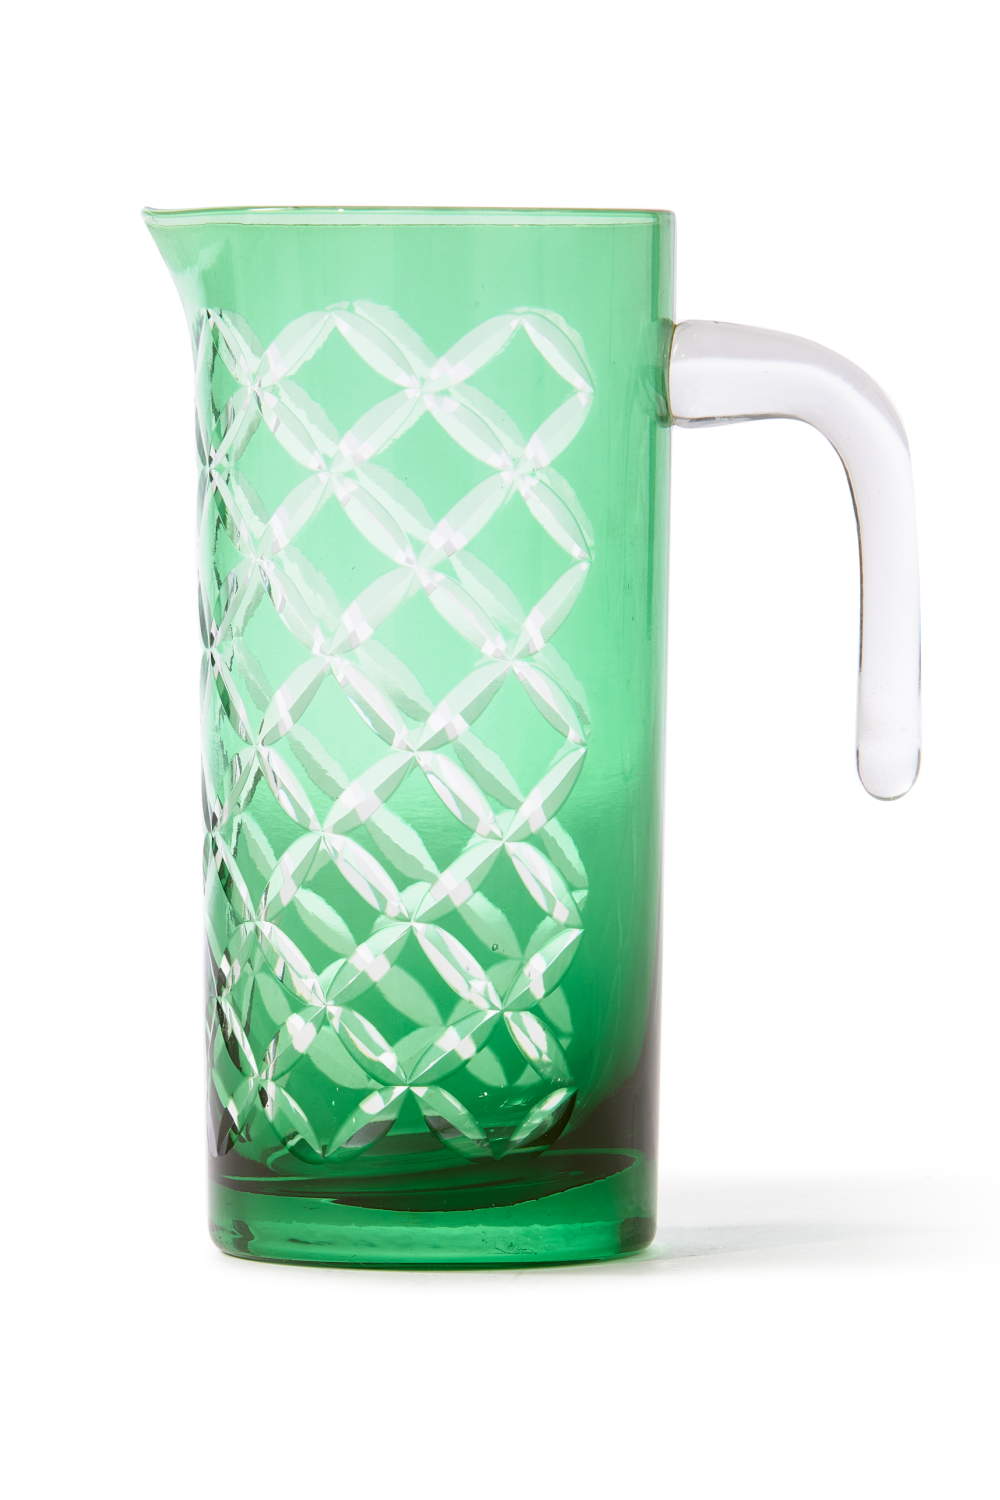 Patterned Green Glass Pitcher | Pols Potten Cuttings | Oroa.com